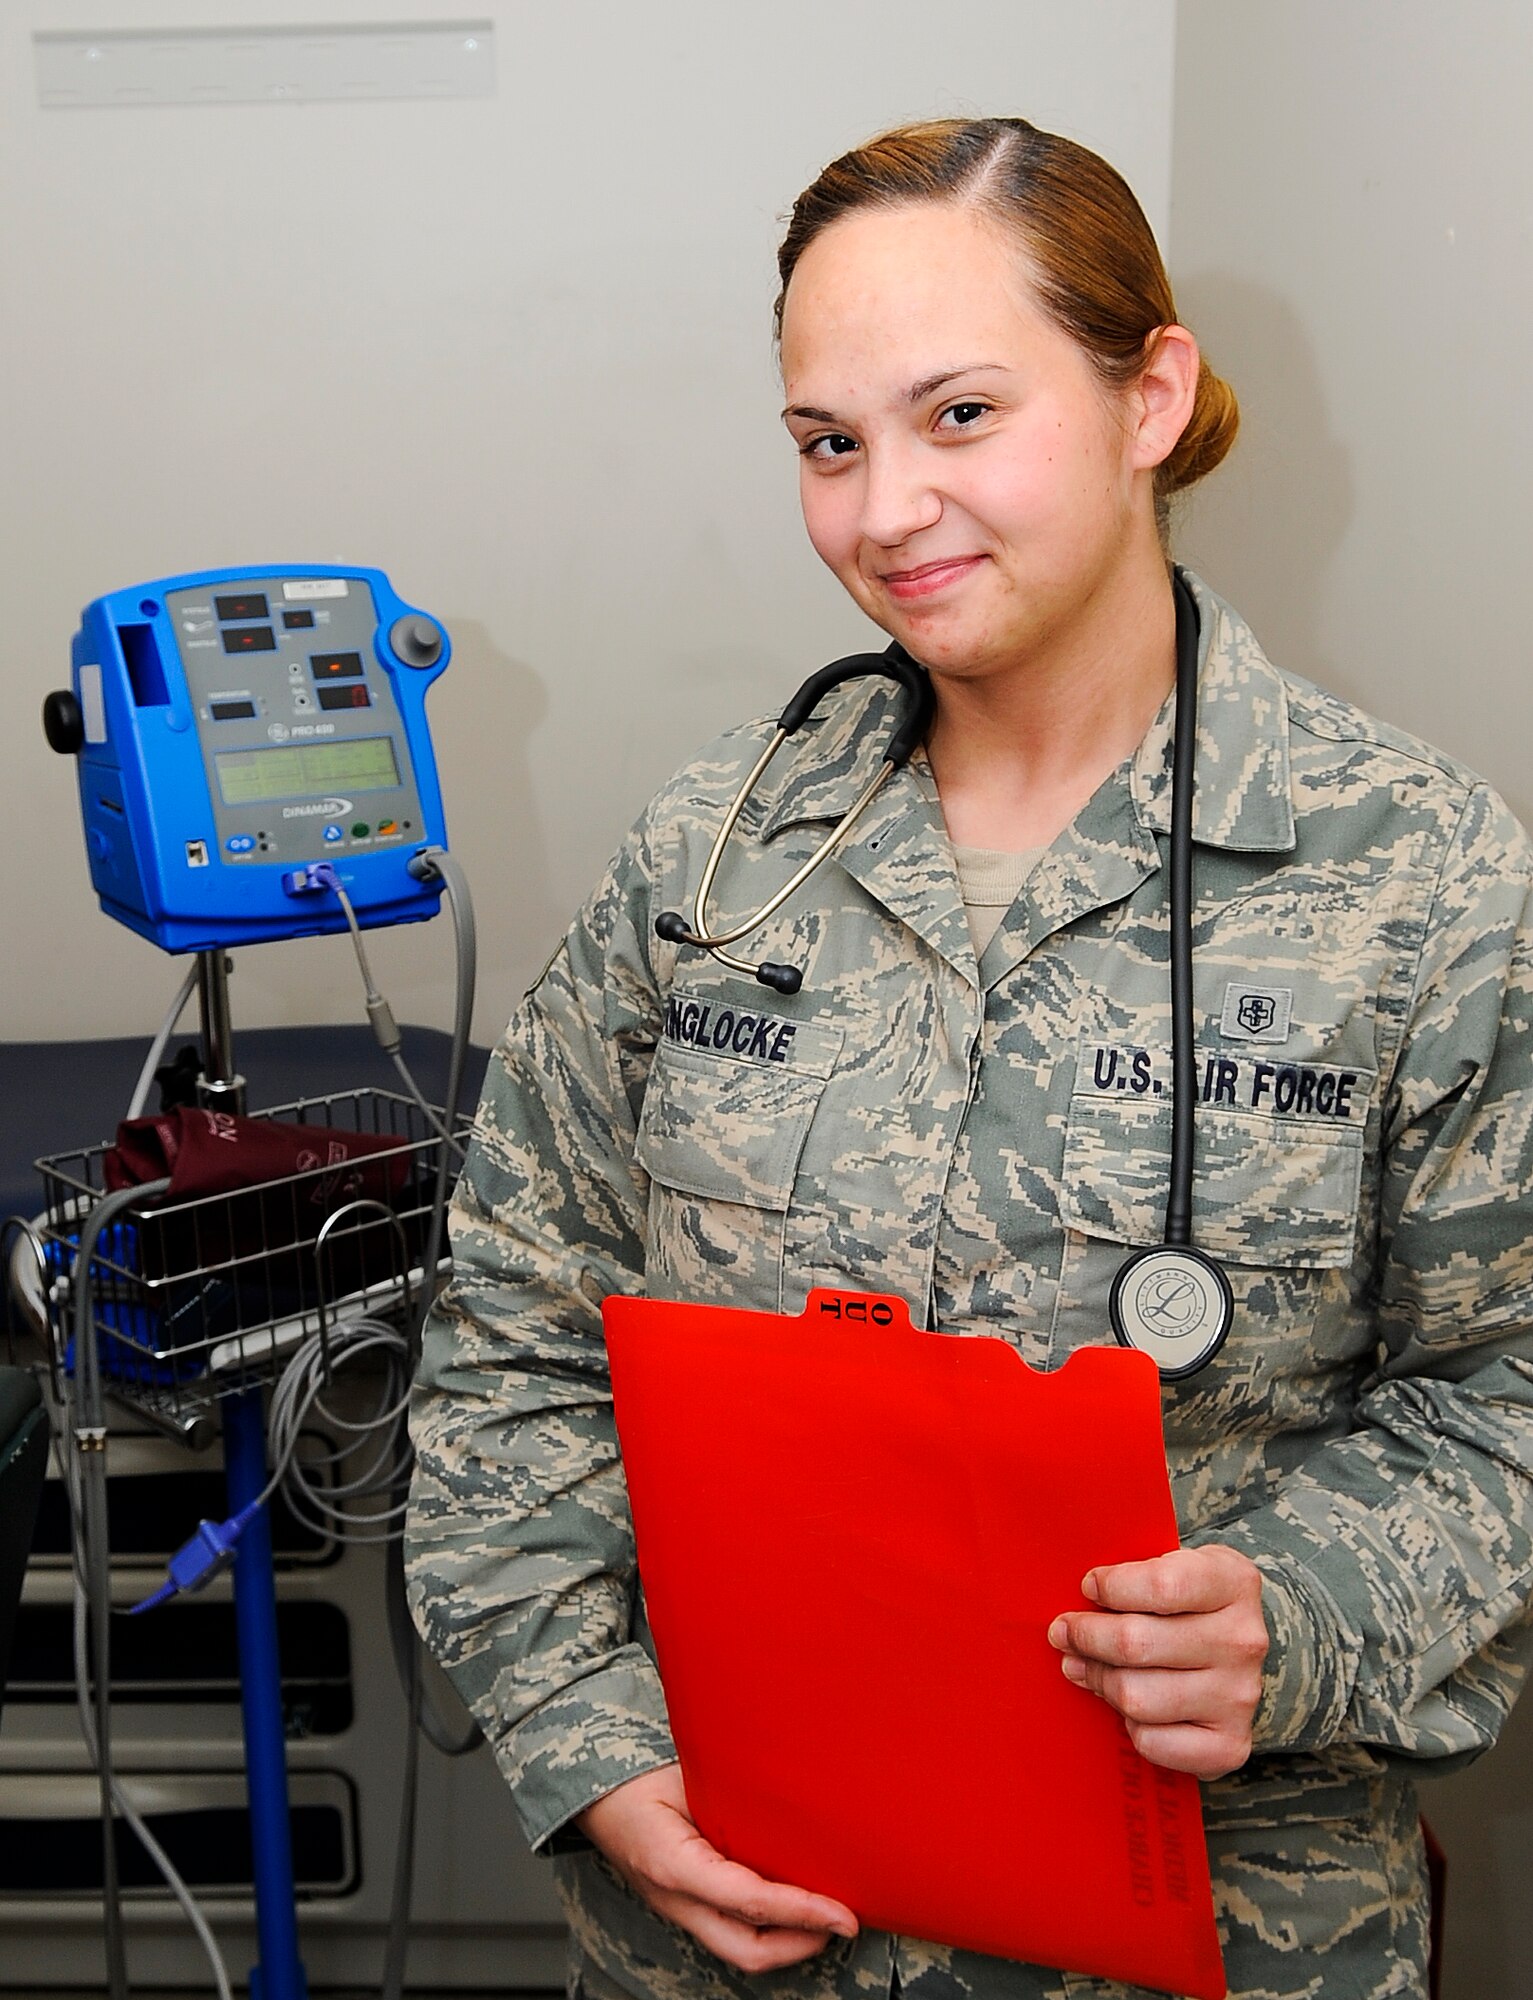 Senior Airman Laura Kinglocke, assigned to the 1st Special Operations Aerospace Medicine Squadron, is a medical technician with the 1st Special Operations Medical Group on Hurlburt Field. Kinglocke responded to a major accident on U.S. Highway 98 and saved the life of a motorcyclist Oct. 17, 2014. (U.S. Air Force photo/Airman 1st Class Andrea Posey)